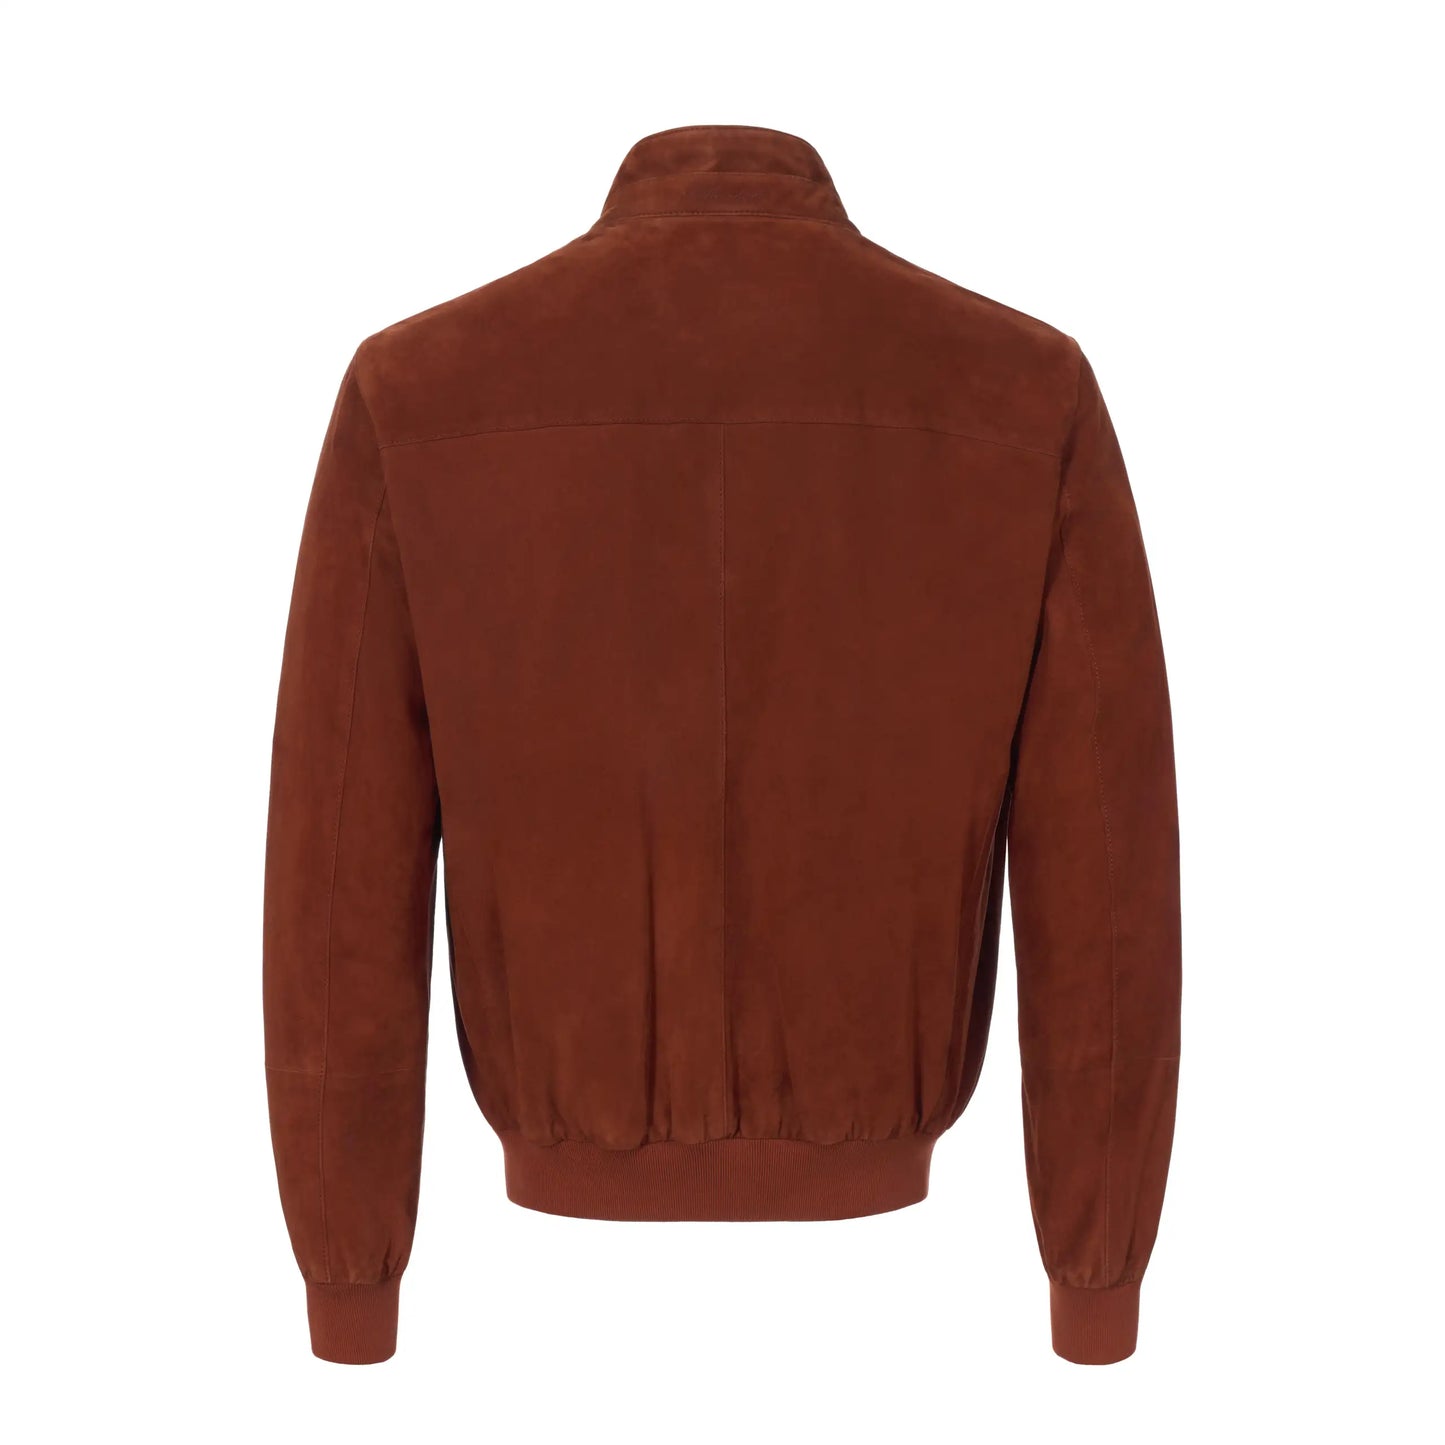 Suede Leather Slim-Fit Bomber Jacket in Brick Red